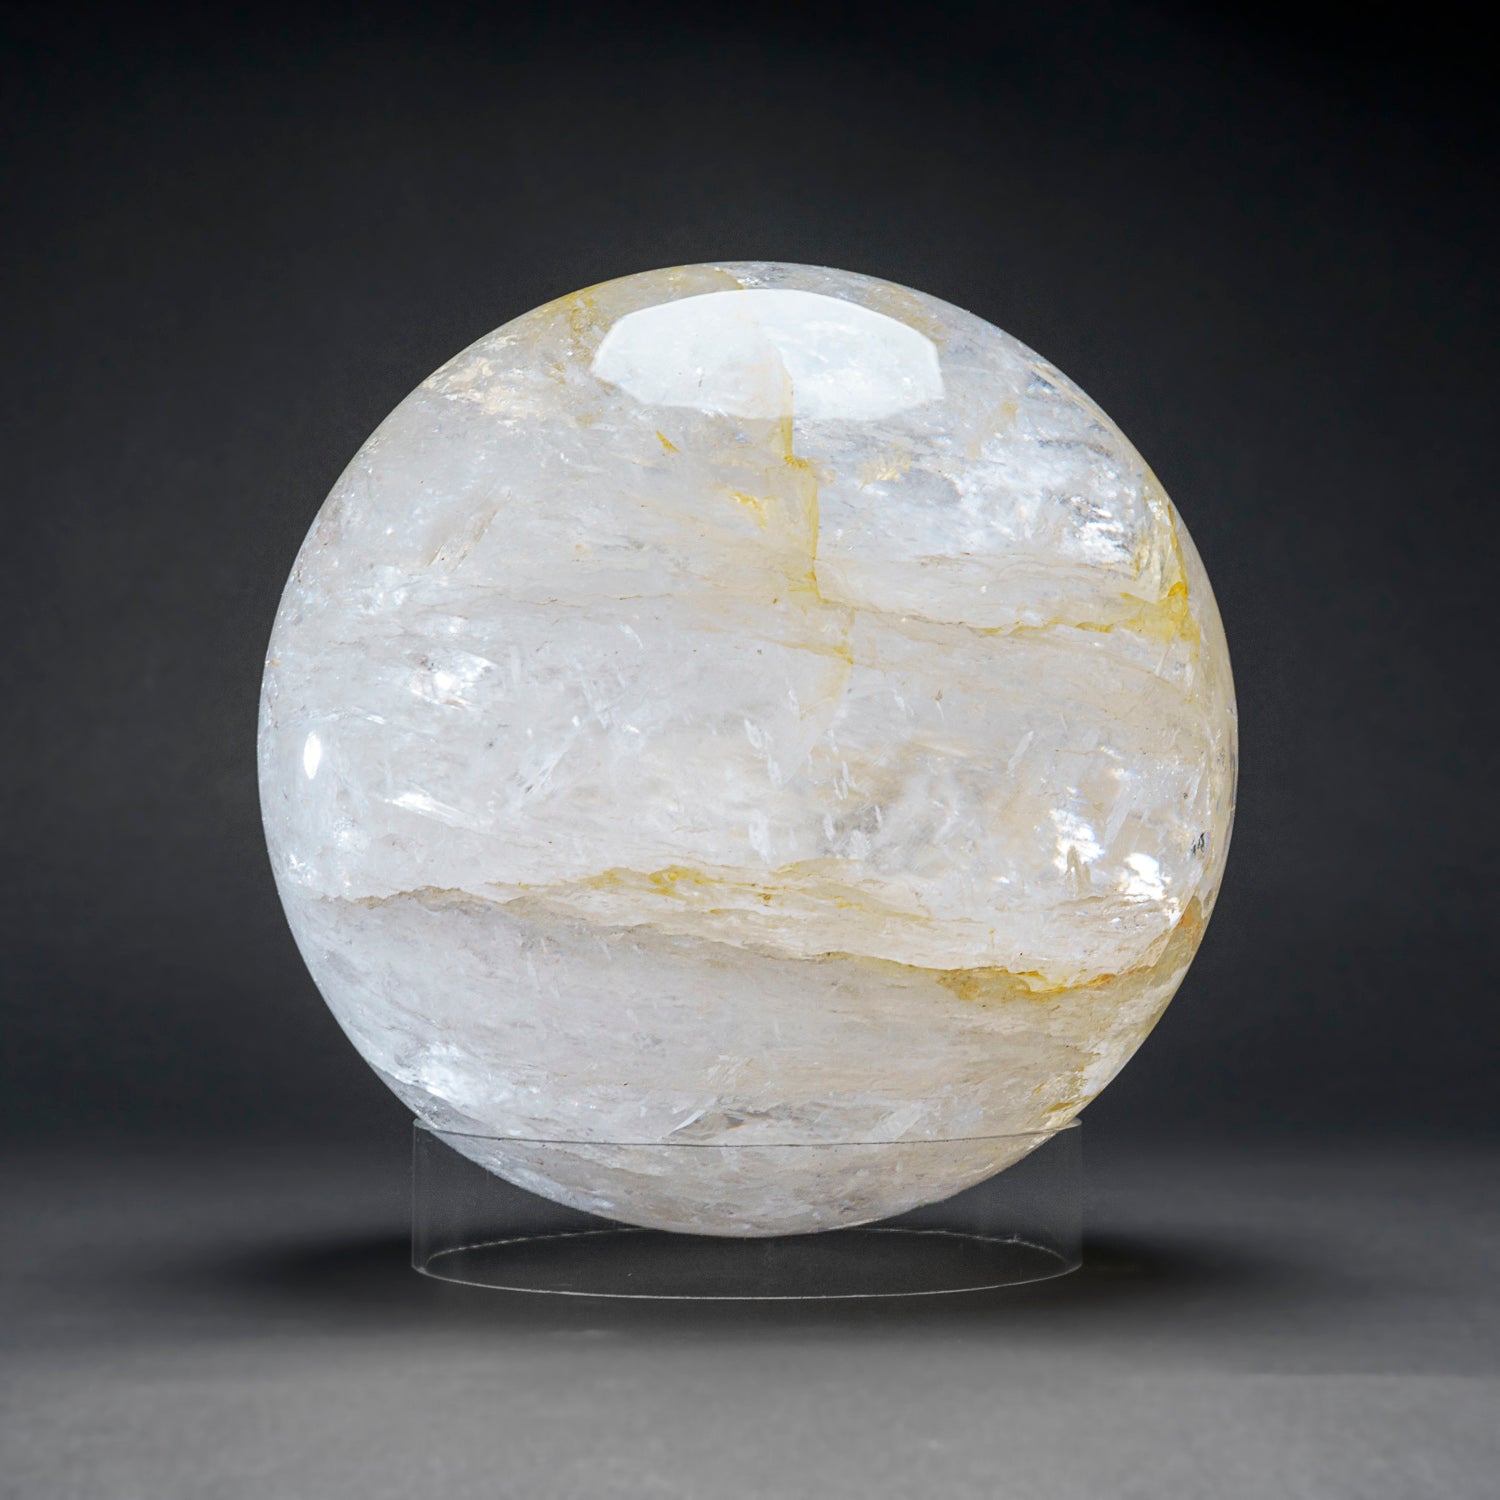 Large Genuine Polished Clear Quartz Sphere from Brazil (34 lbs)